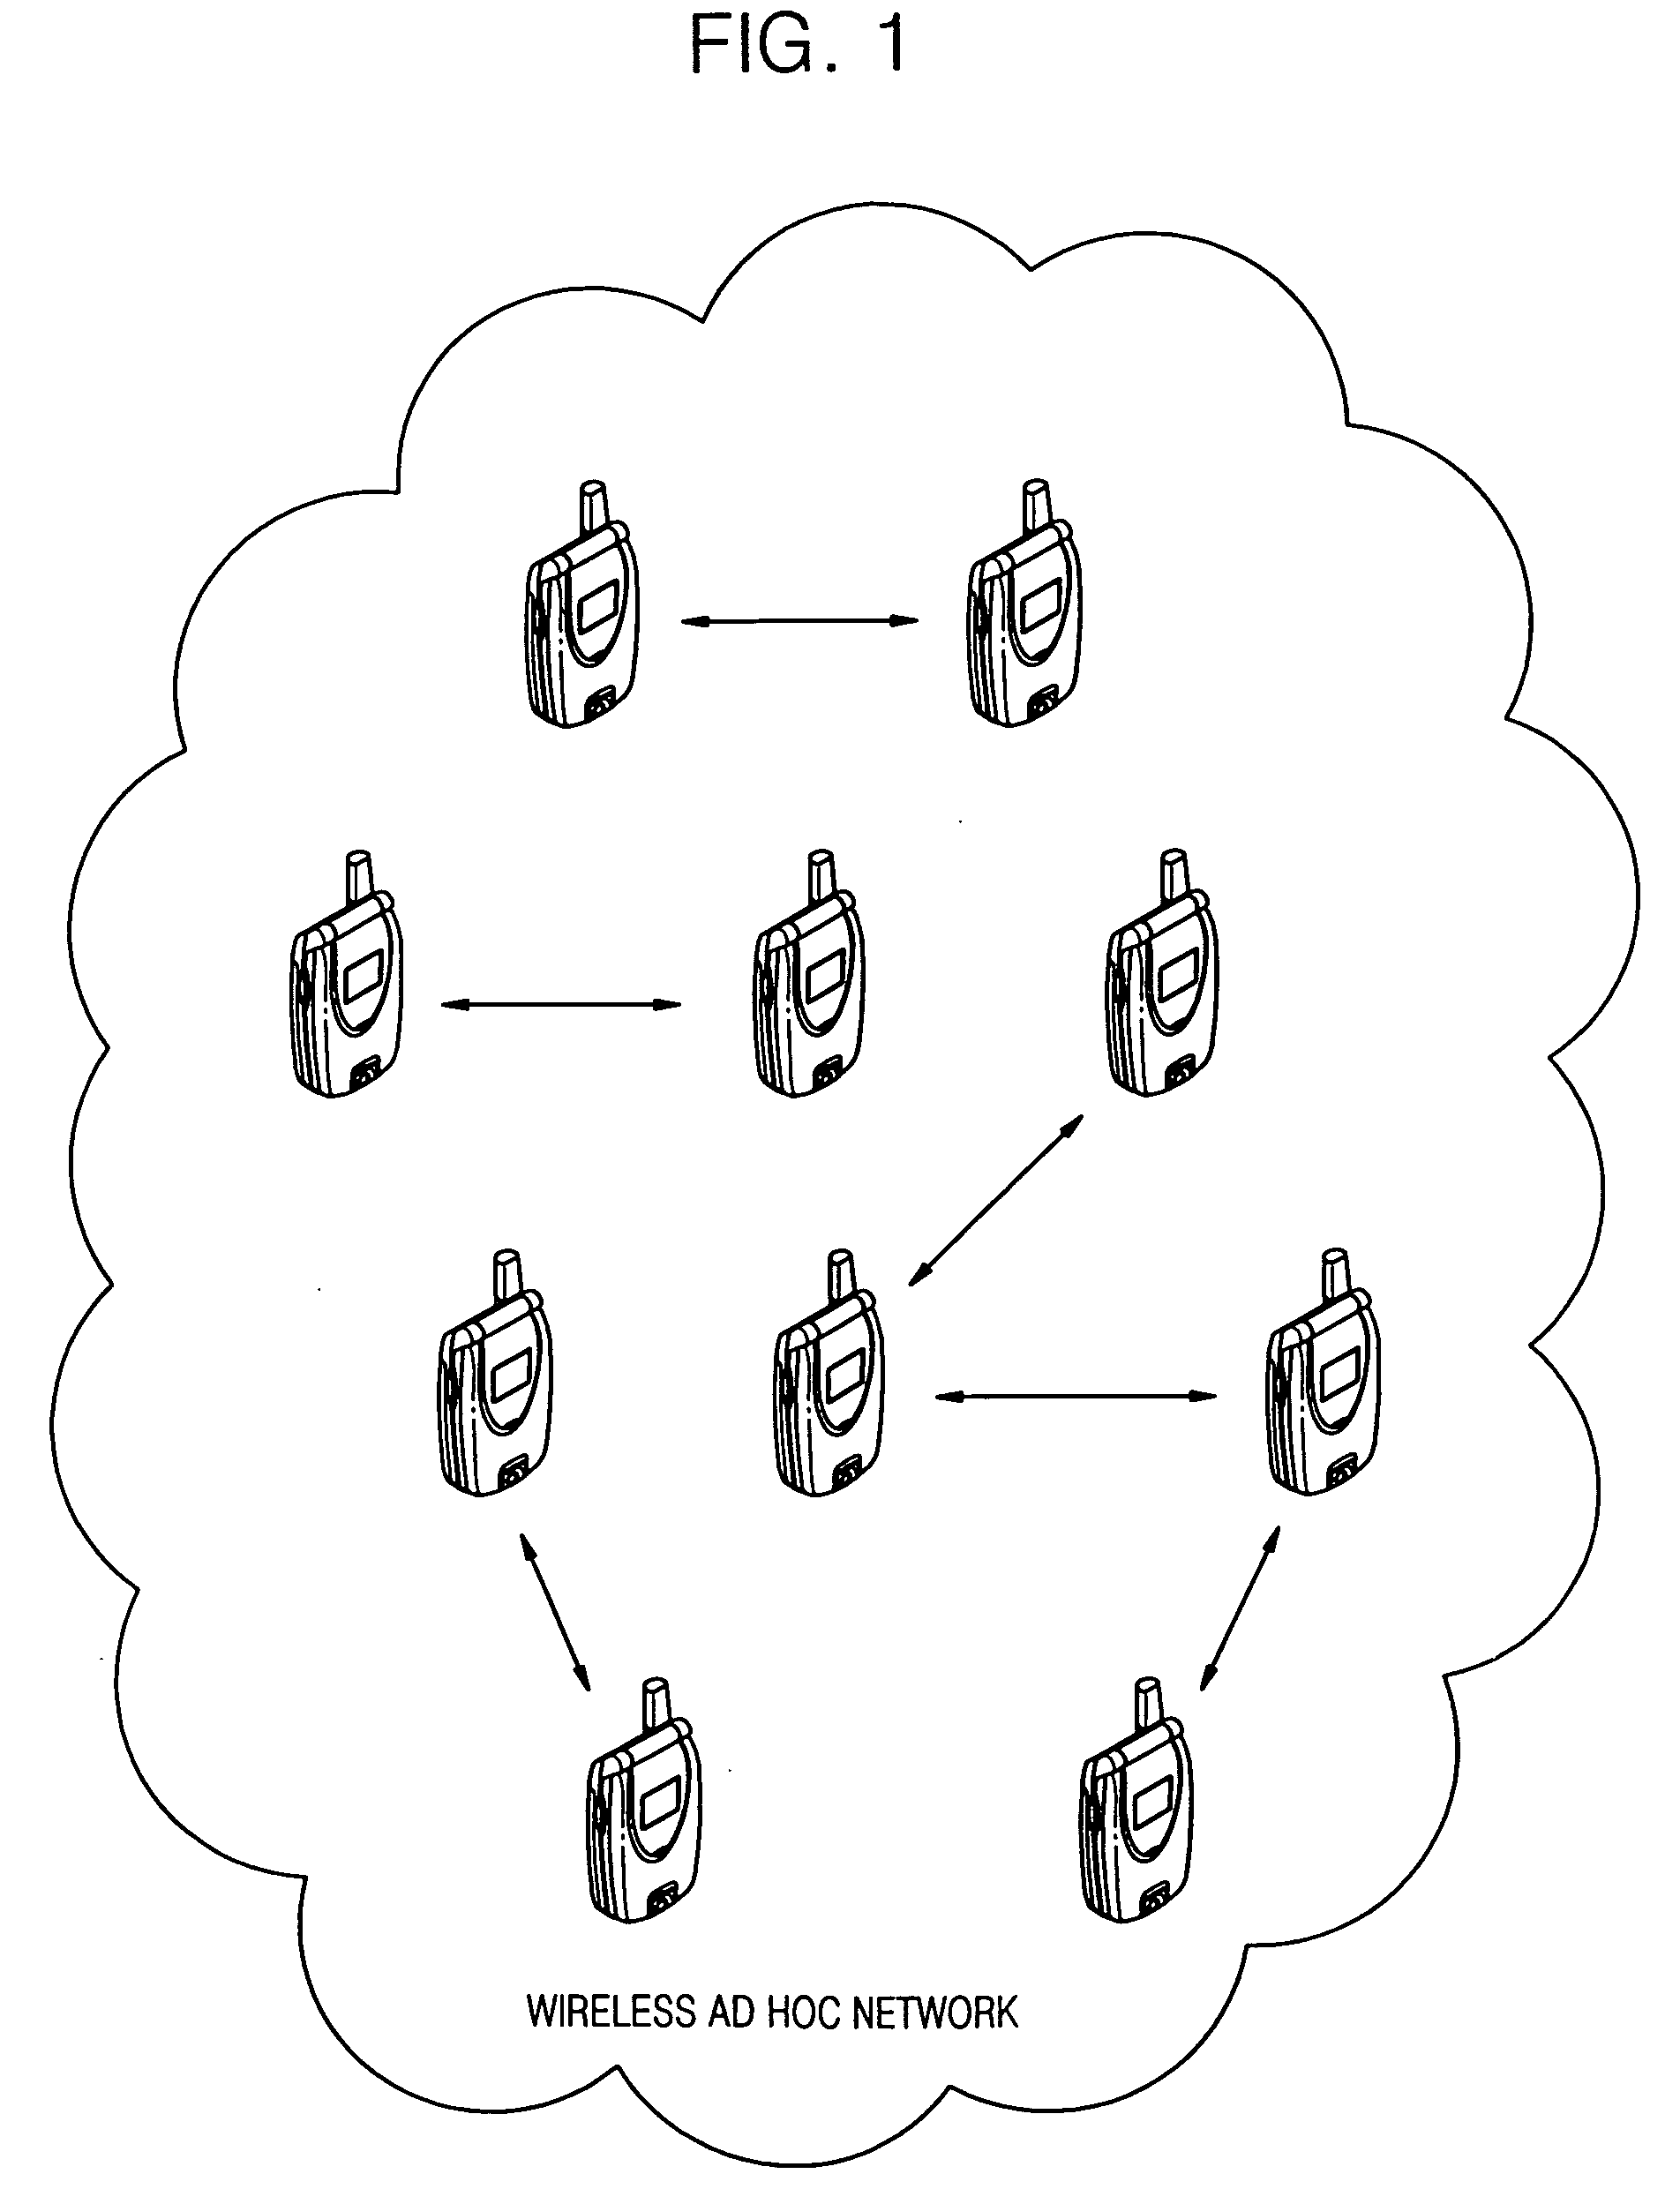 Processing wireless resources in mobile AD hoc network